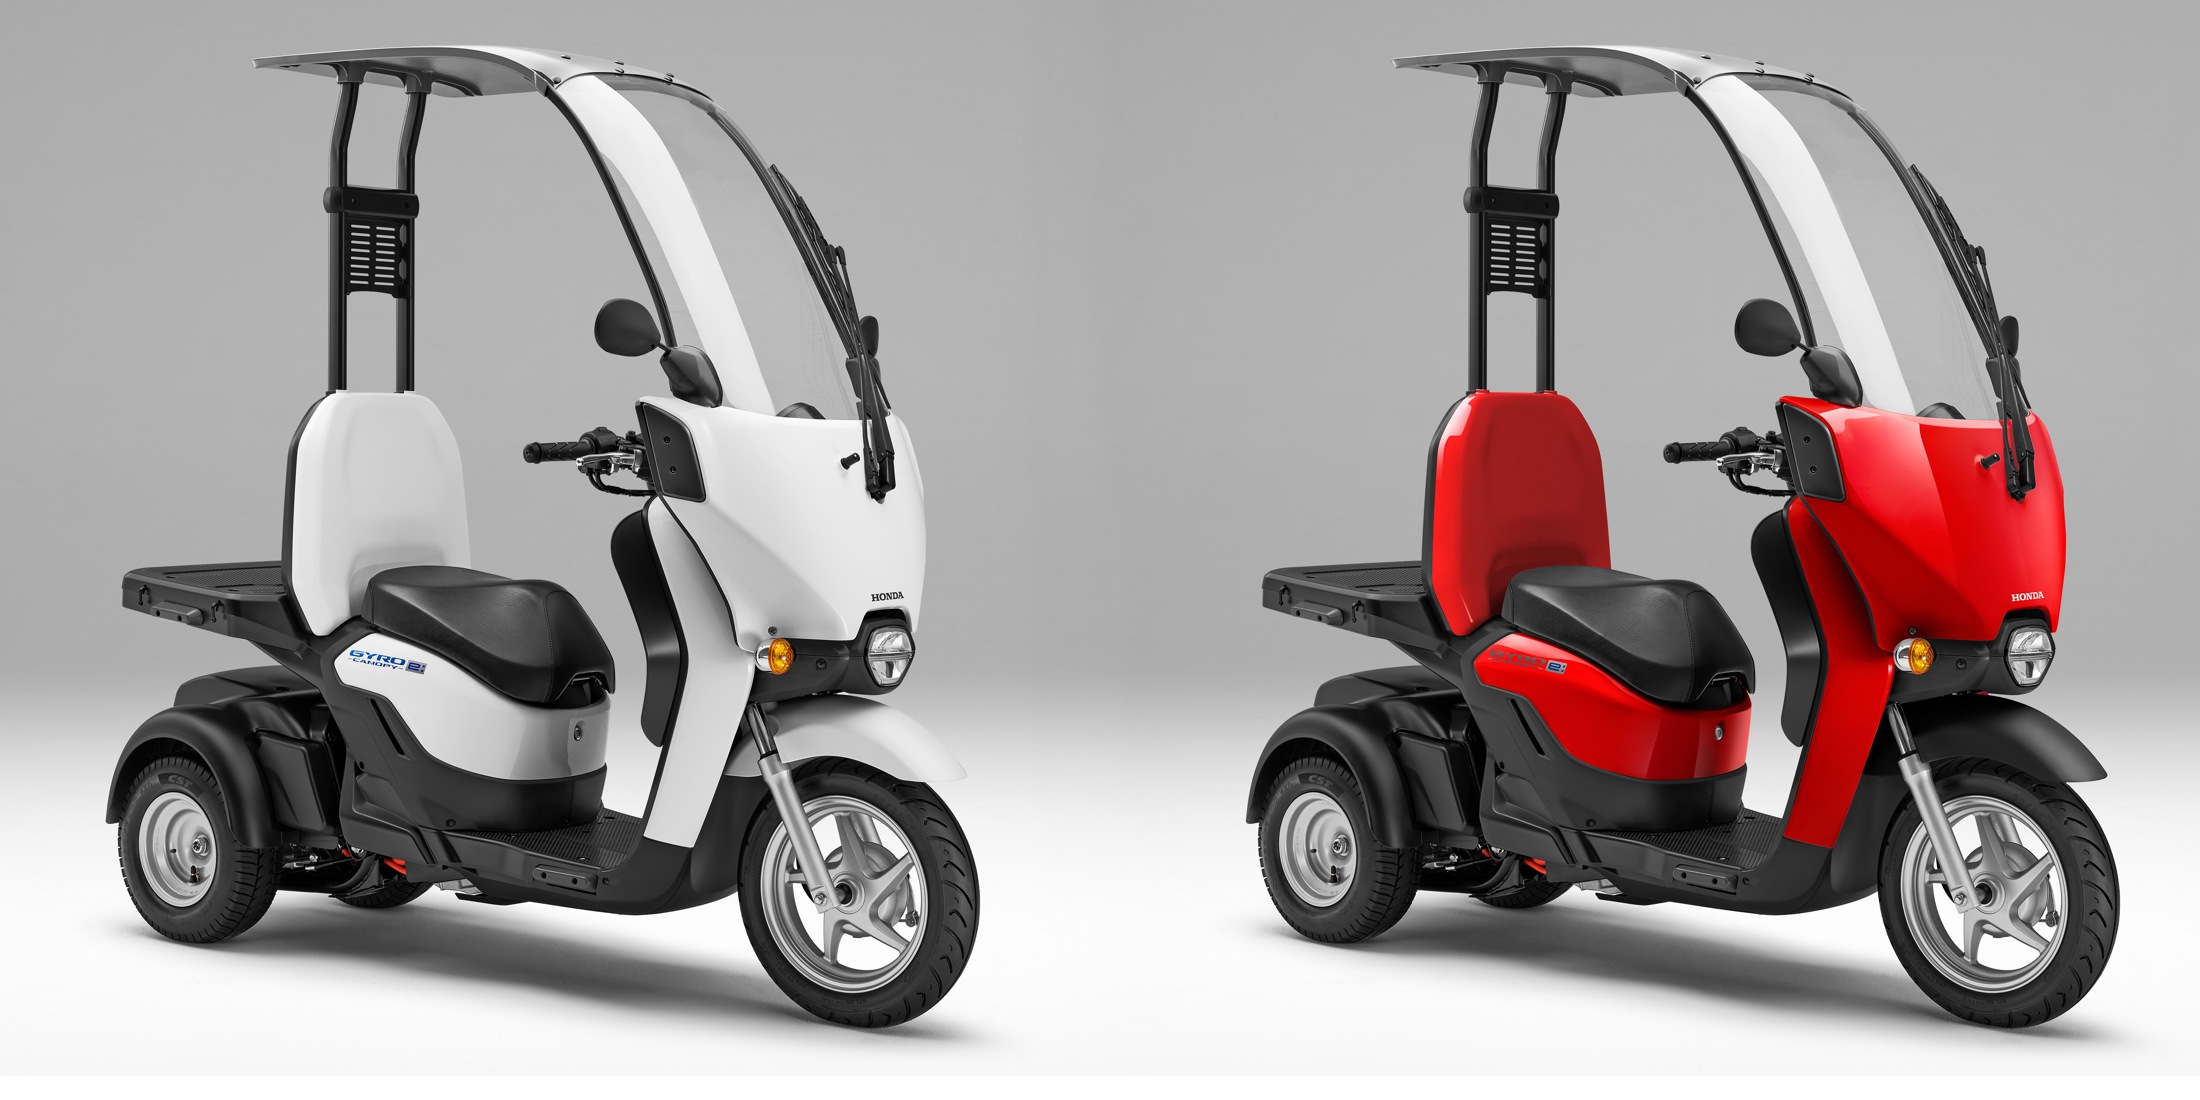 unveils new electric scooter, but not an Honda Cub